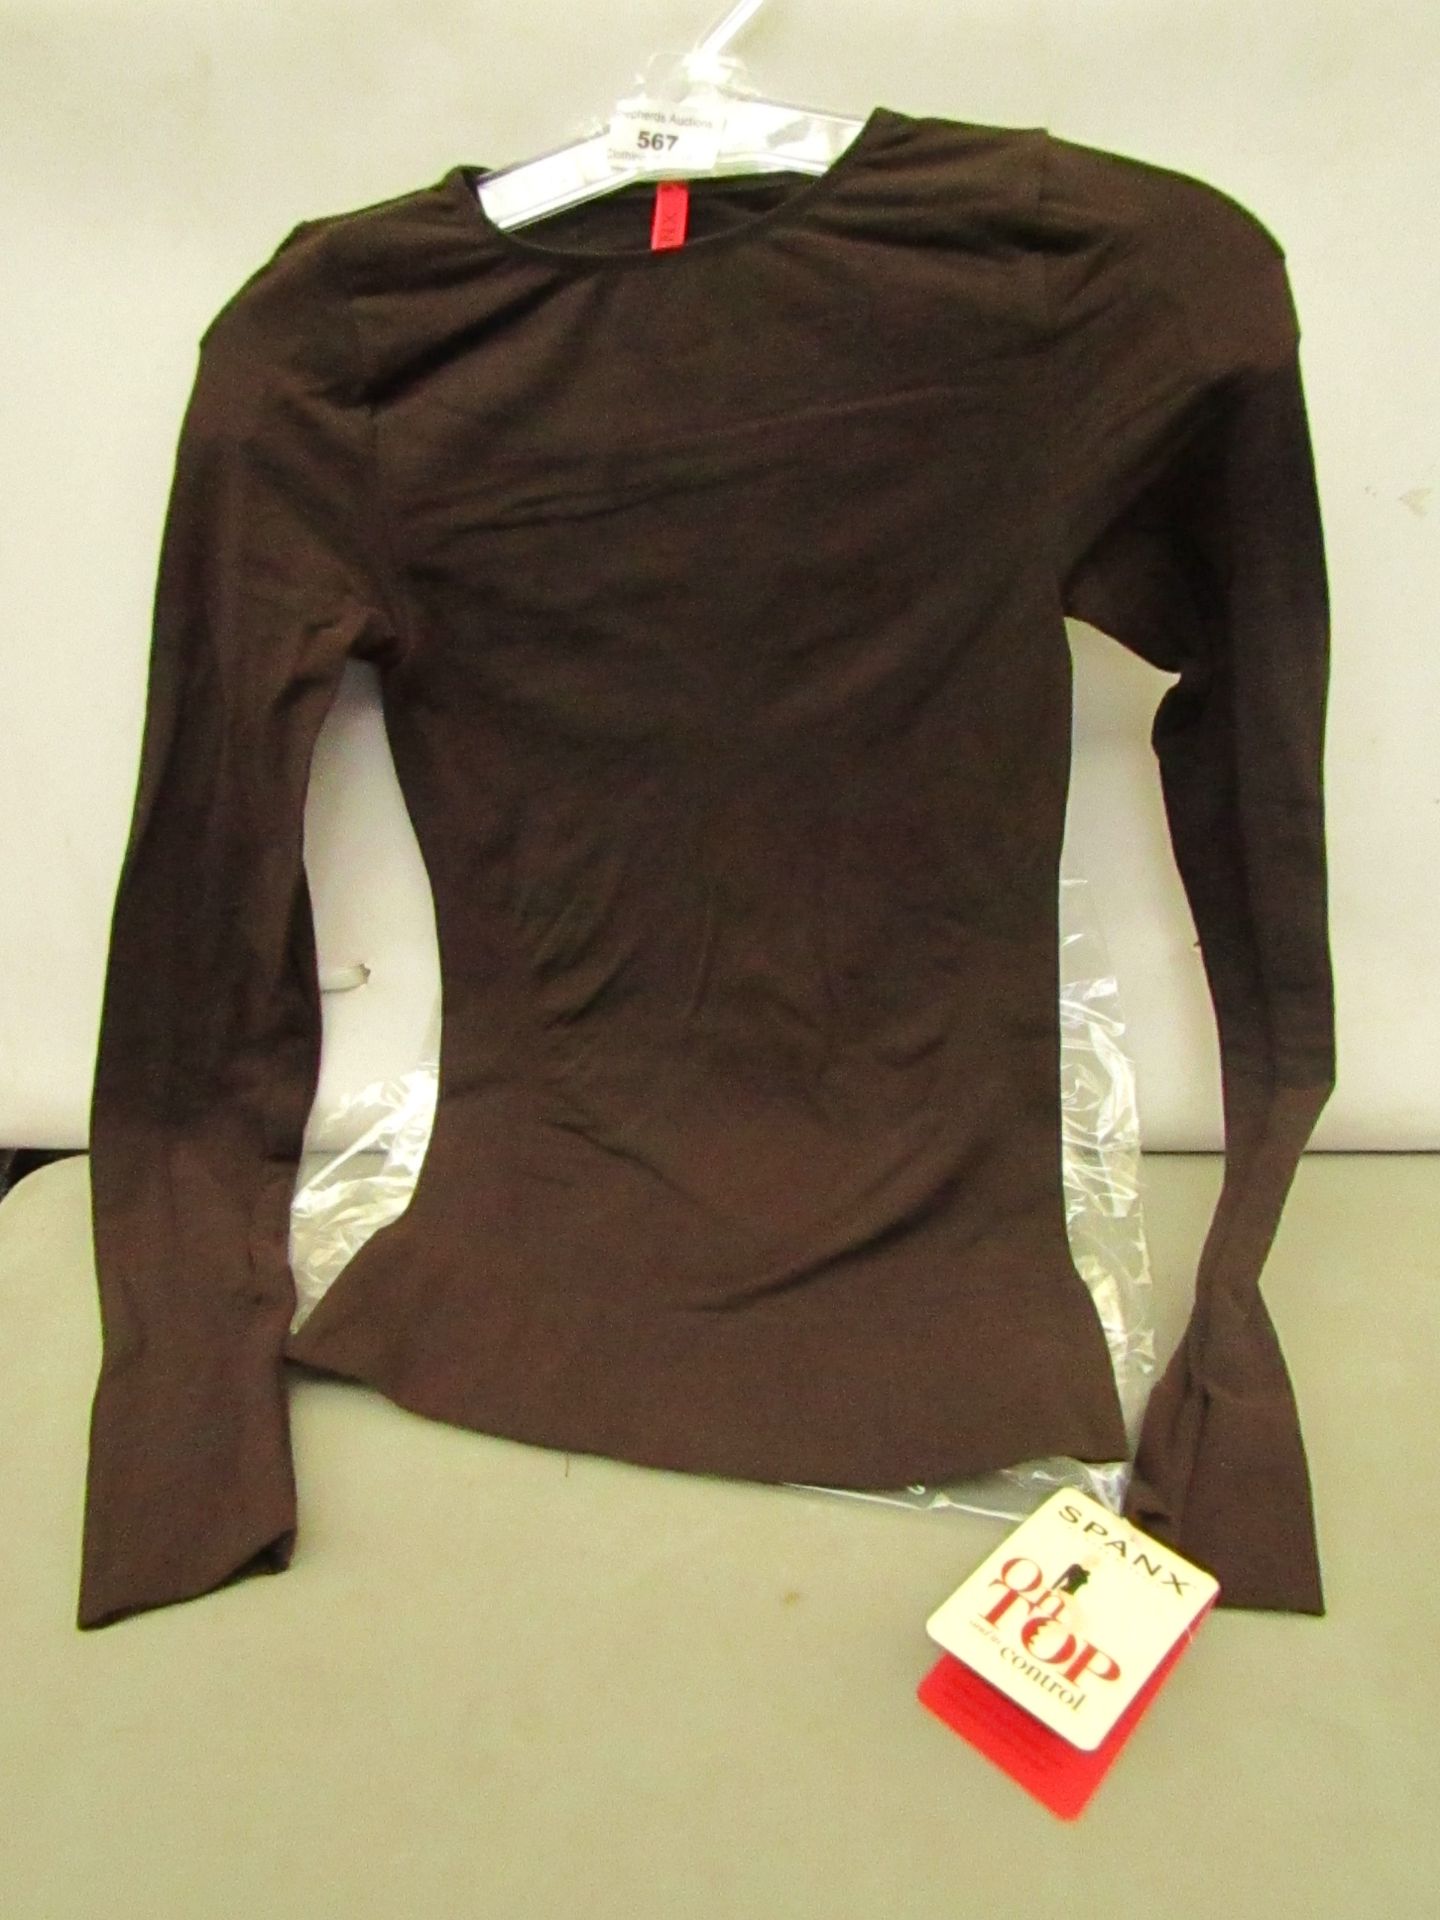 Spanx on Top & In Control Bittersweet Classic Long Sleeve Scoop Neck Top size S (8/10) RRP £29.99 on